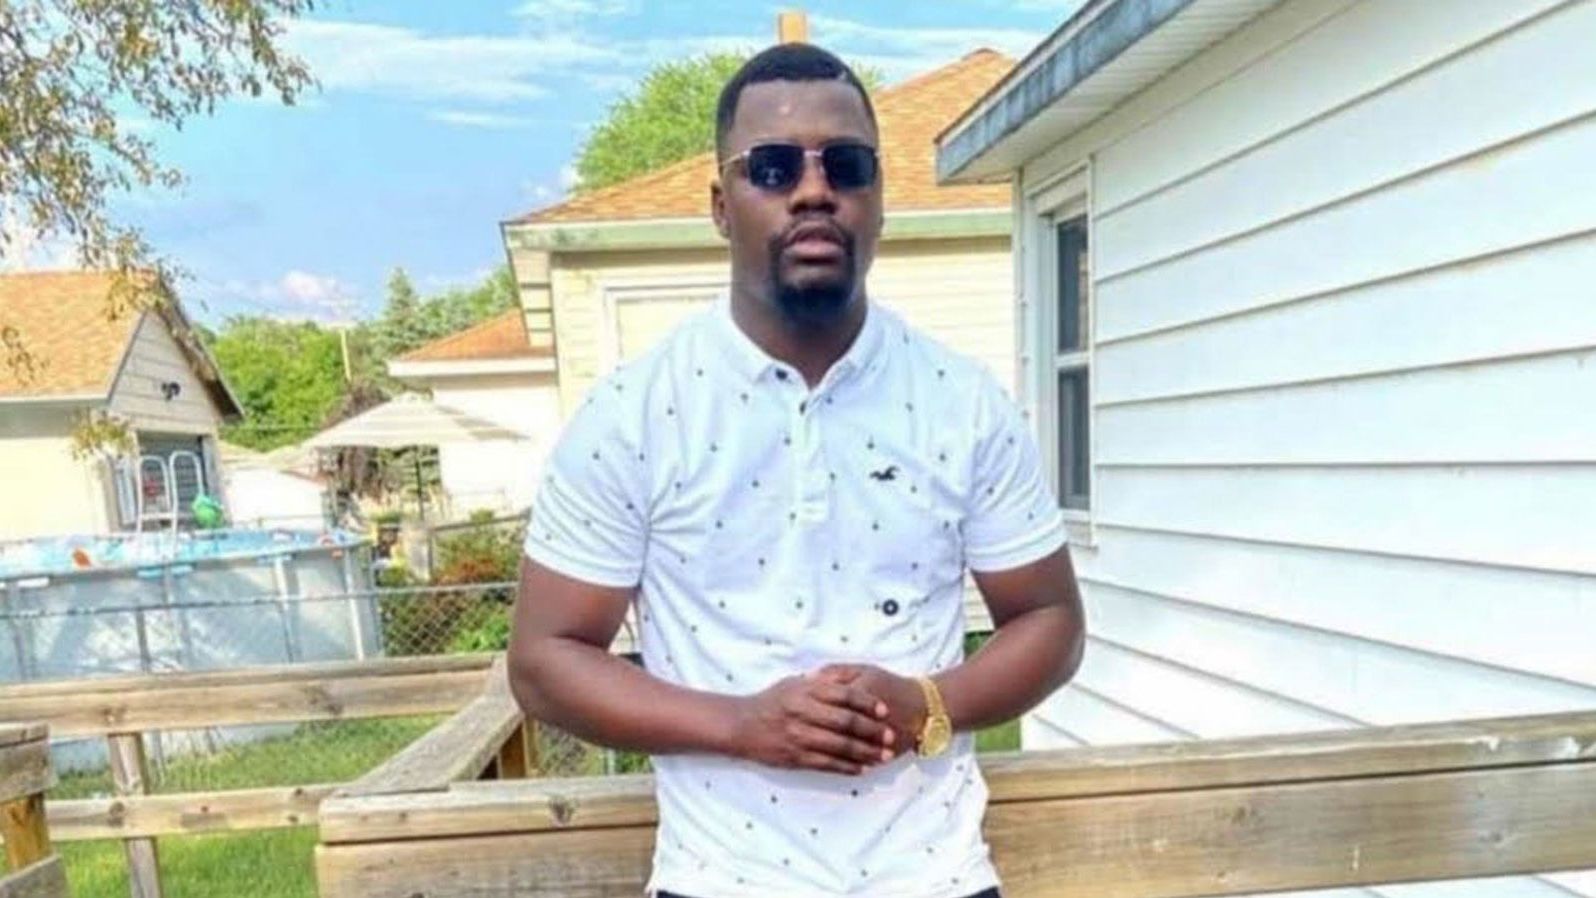 Patrick Lyoya, 26, was shot to death on April 4 in Grand Rapids, Michigan, by a police officer after a traffic stop.